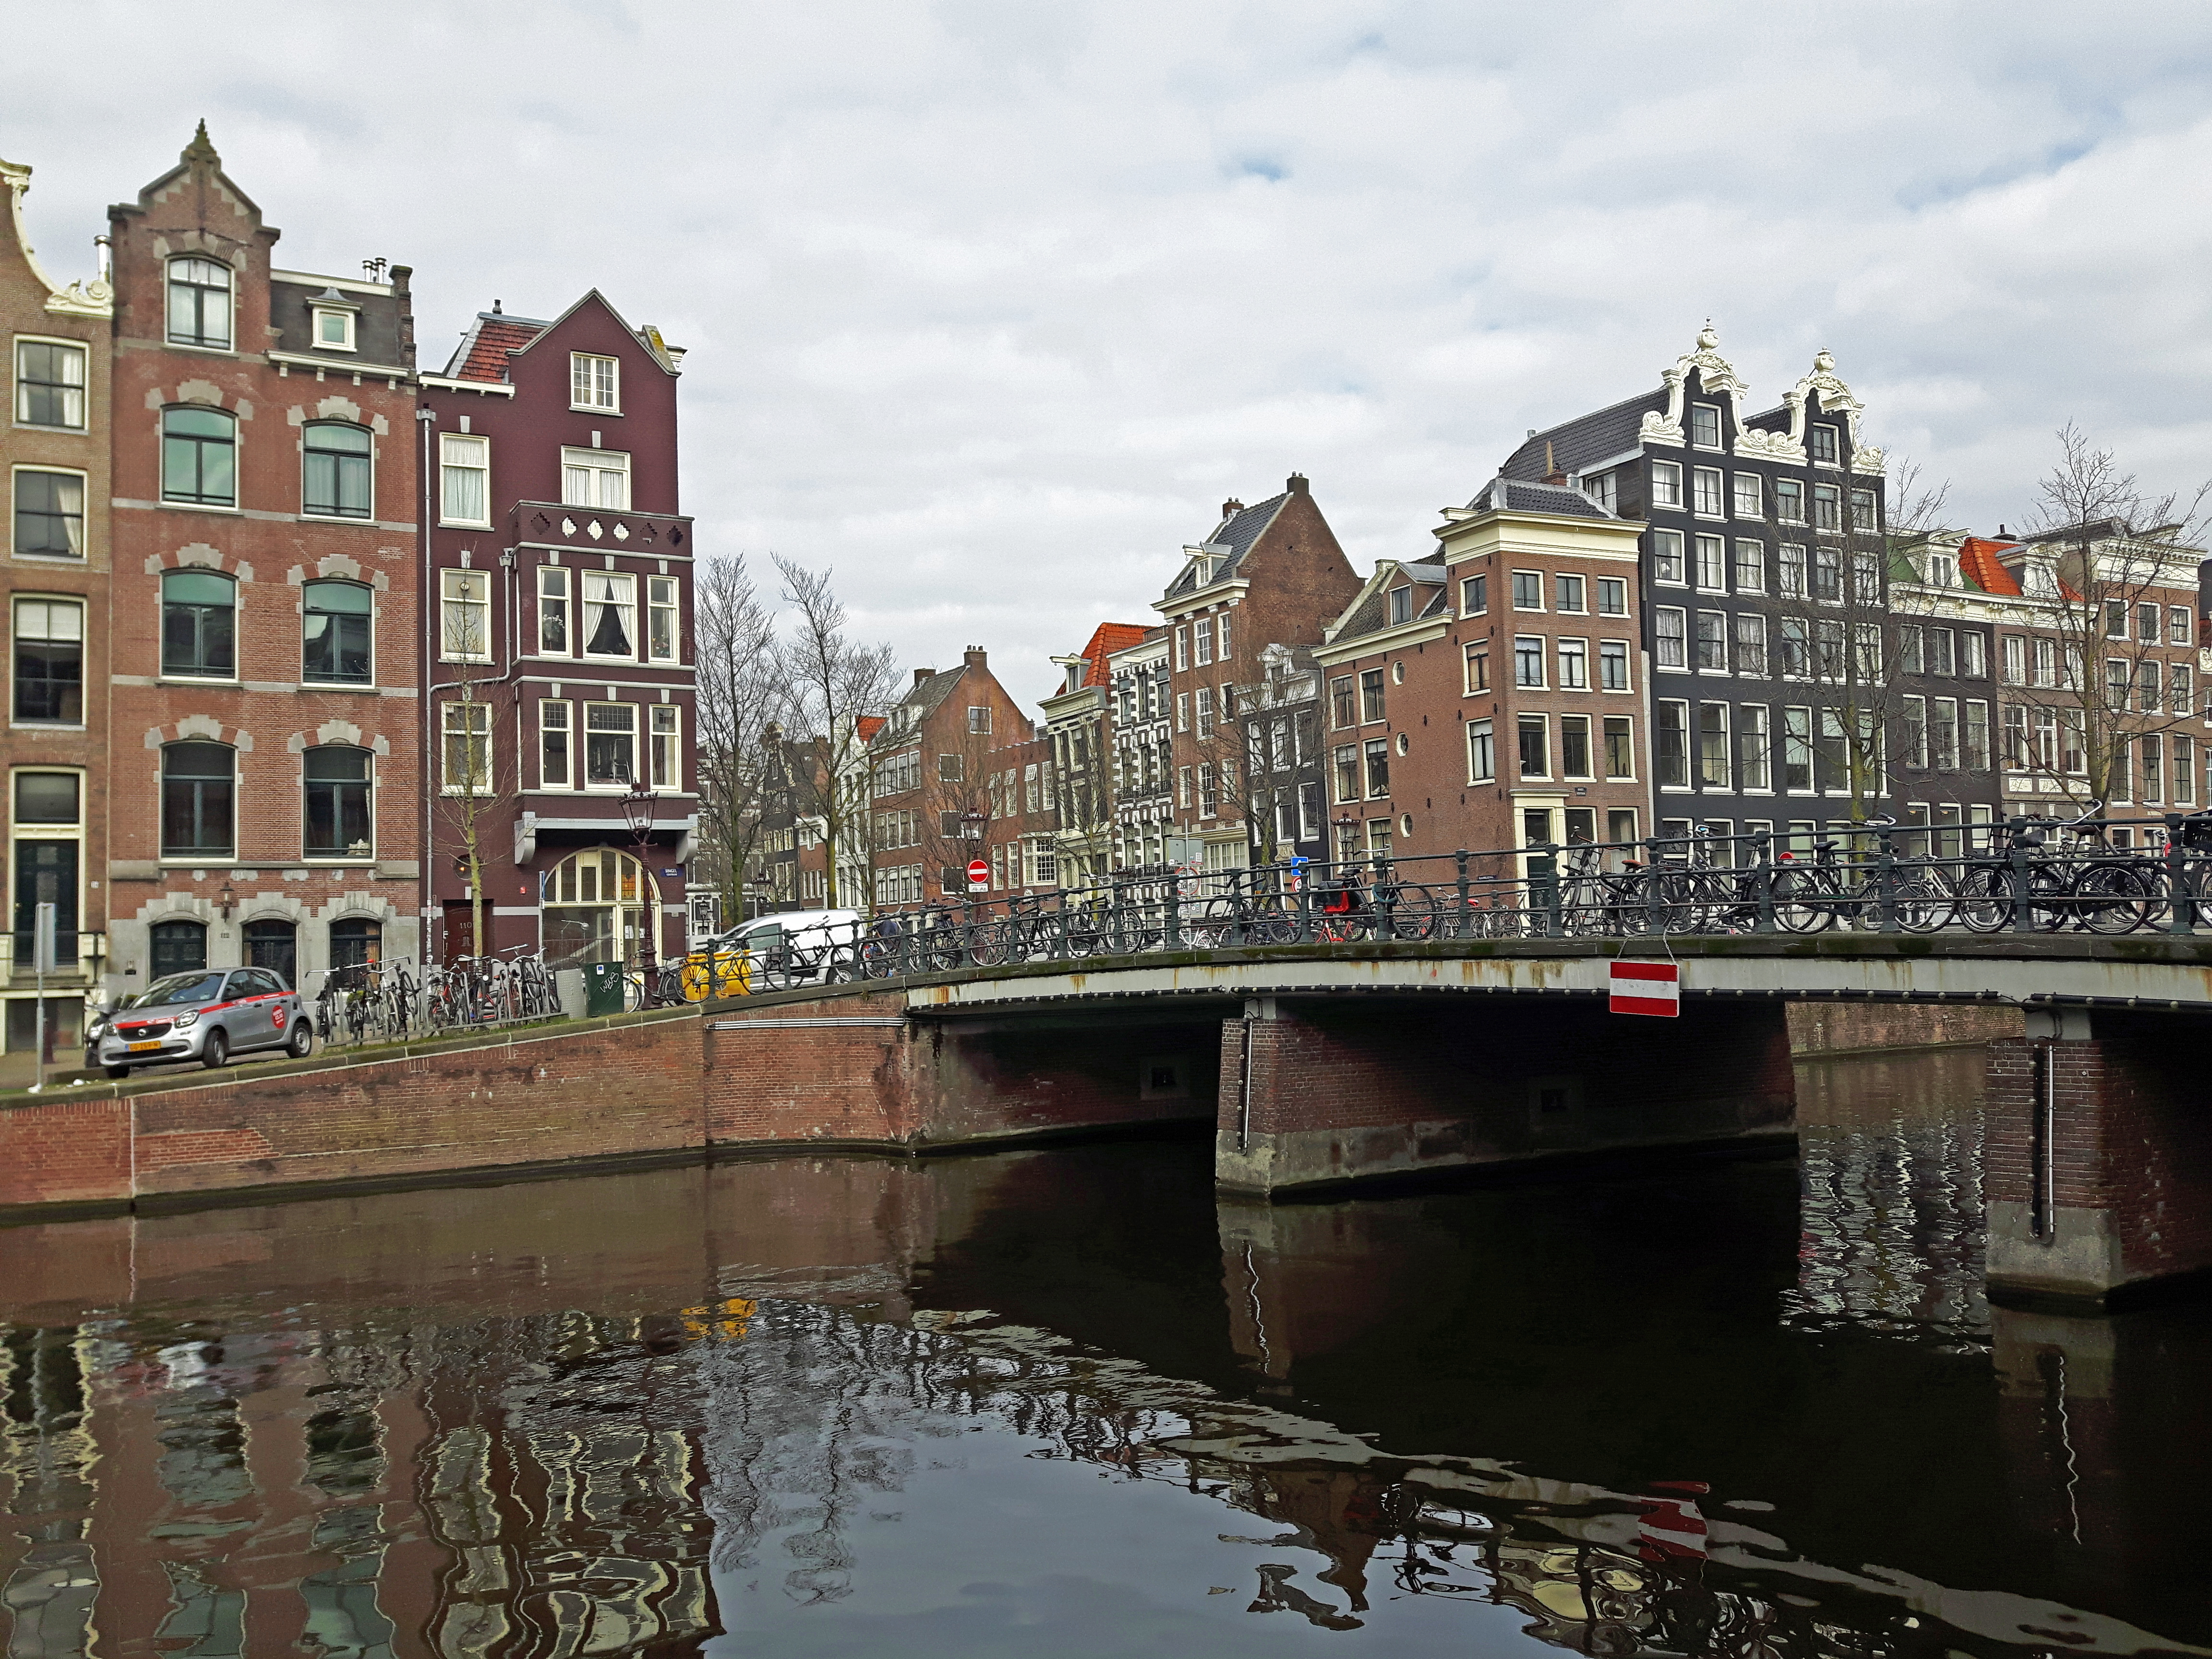 25_Photos_That_Will_Inspire_You_To_Book_A_Trip_To_The_Netherlands